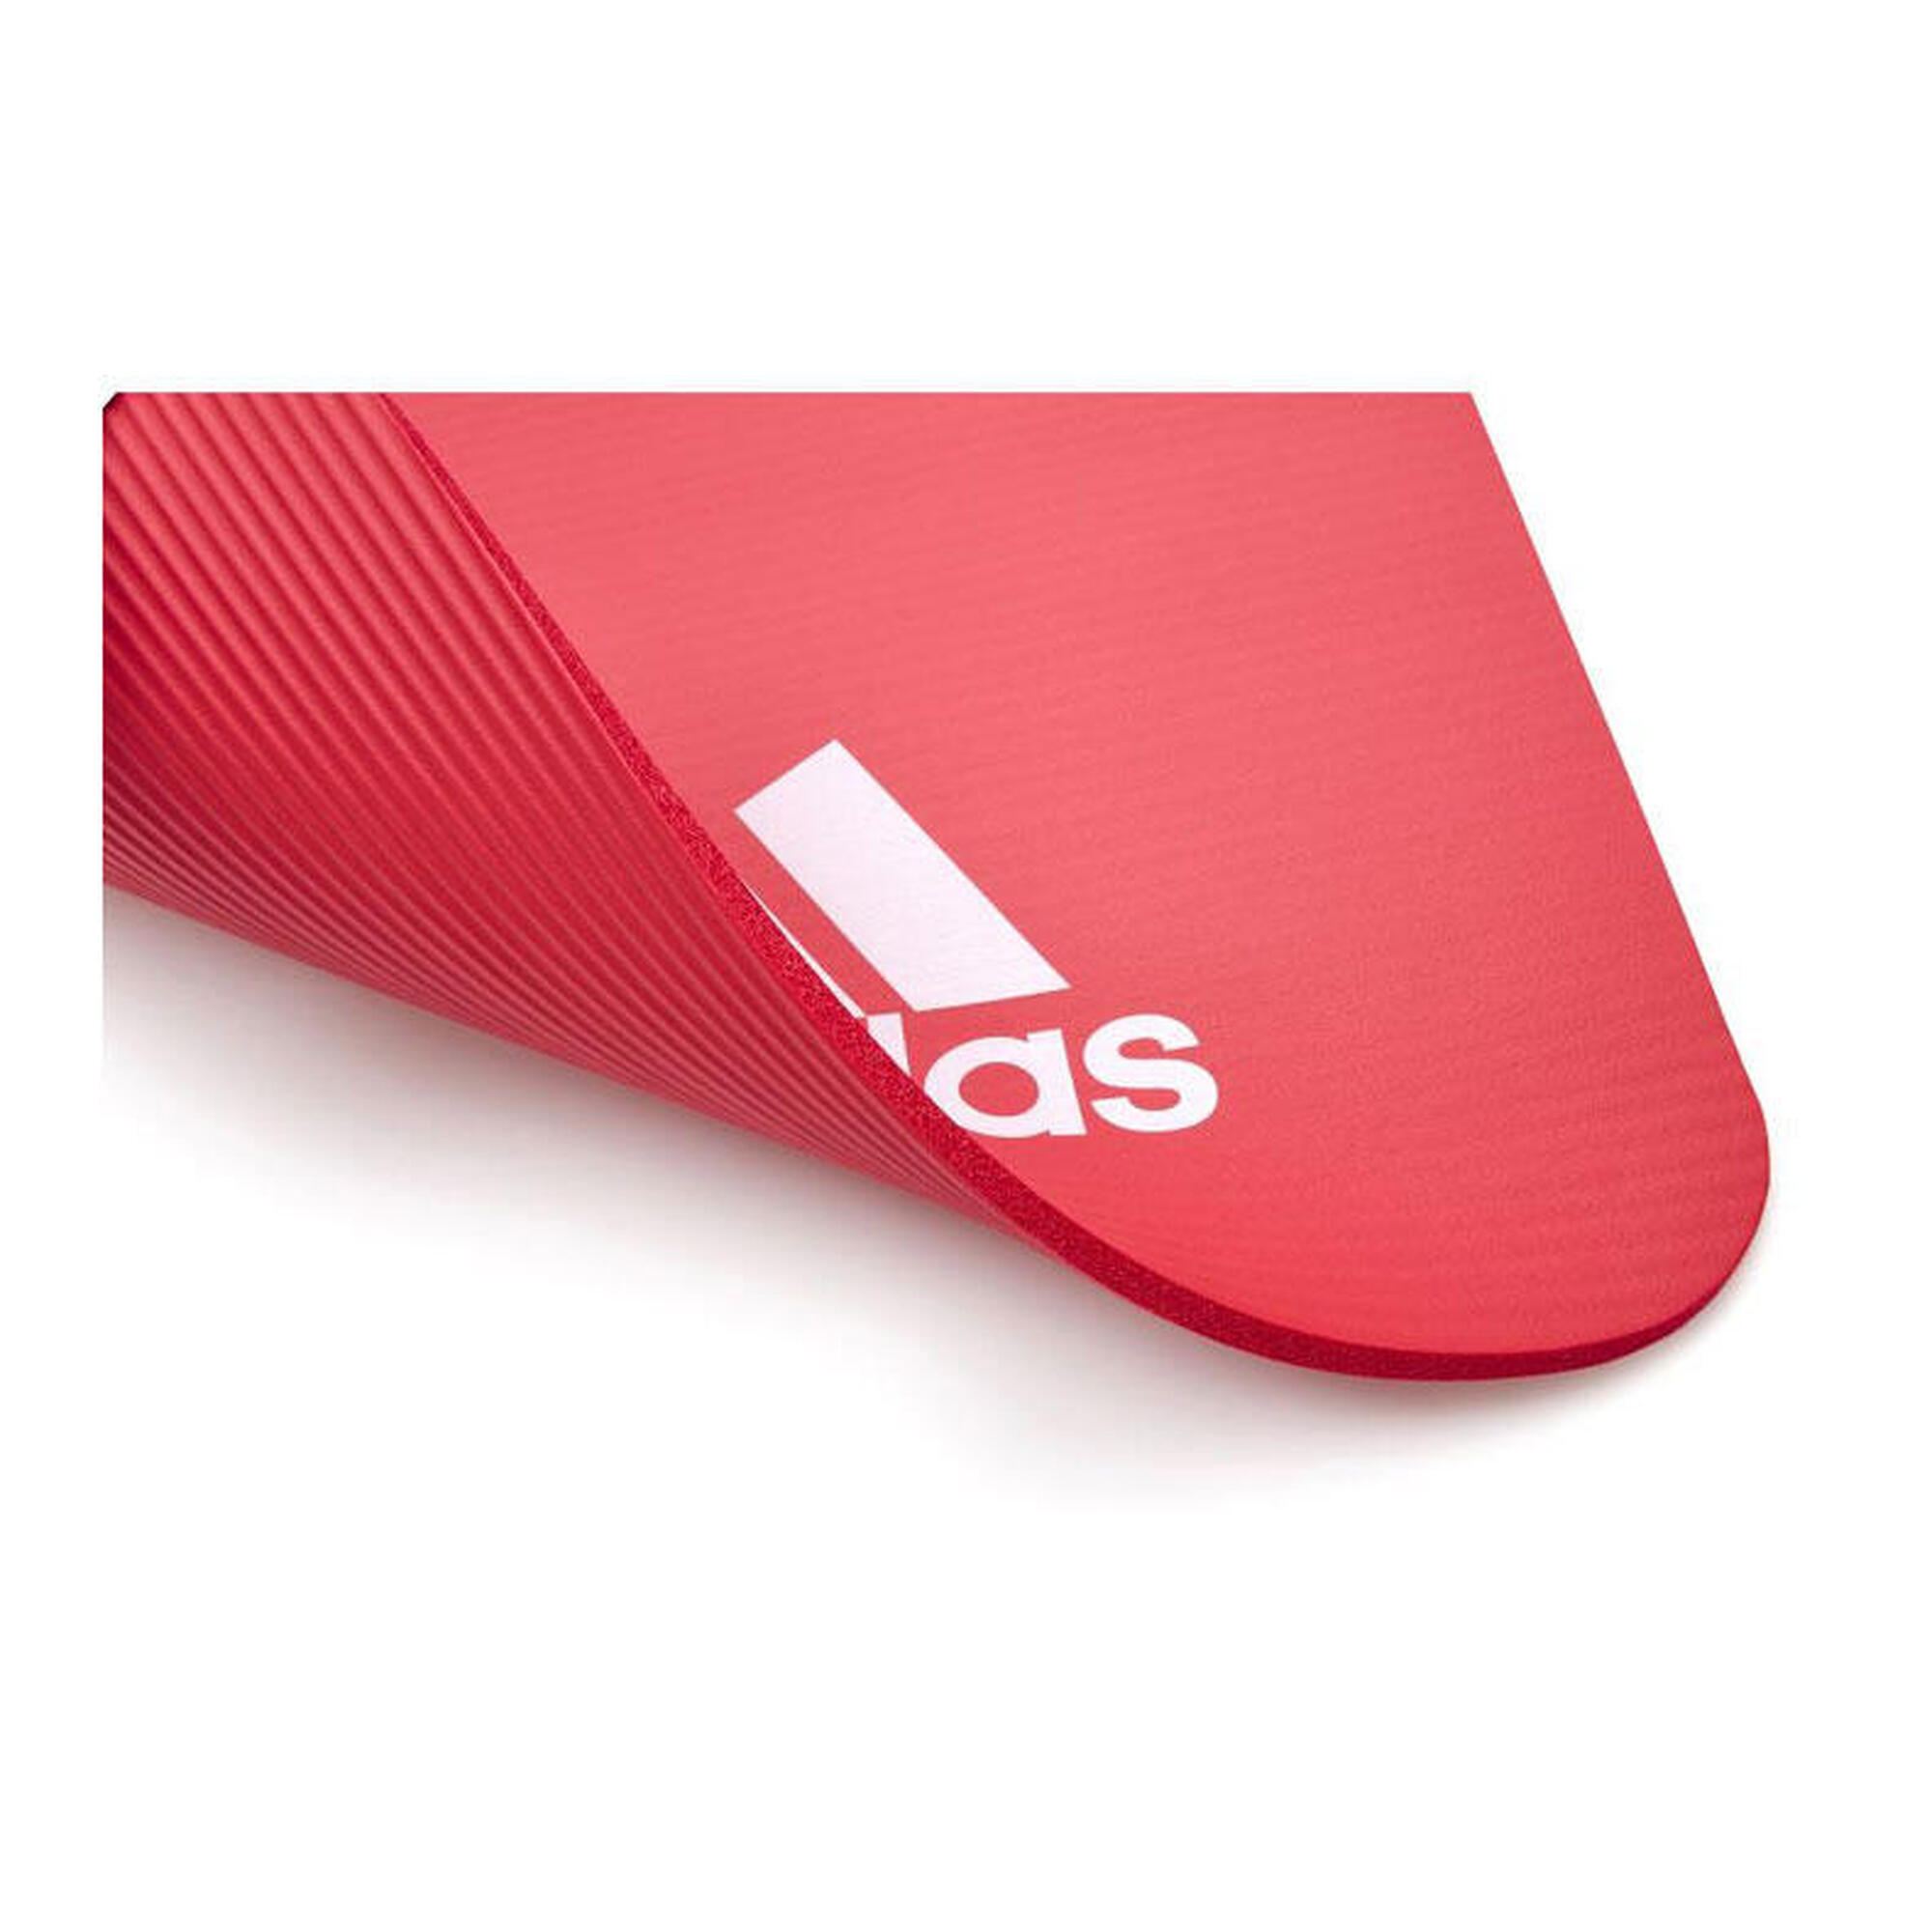 Tappetino di fitness Adidas - 10mm - Rosso